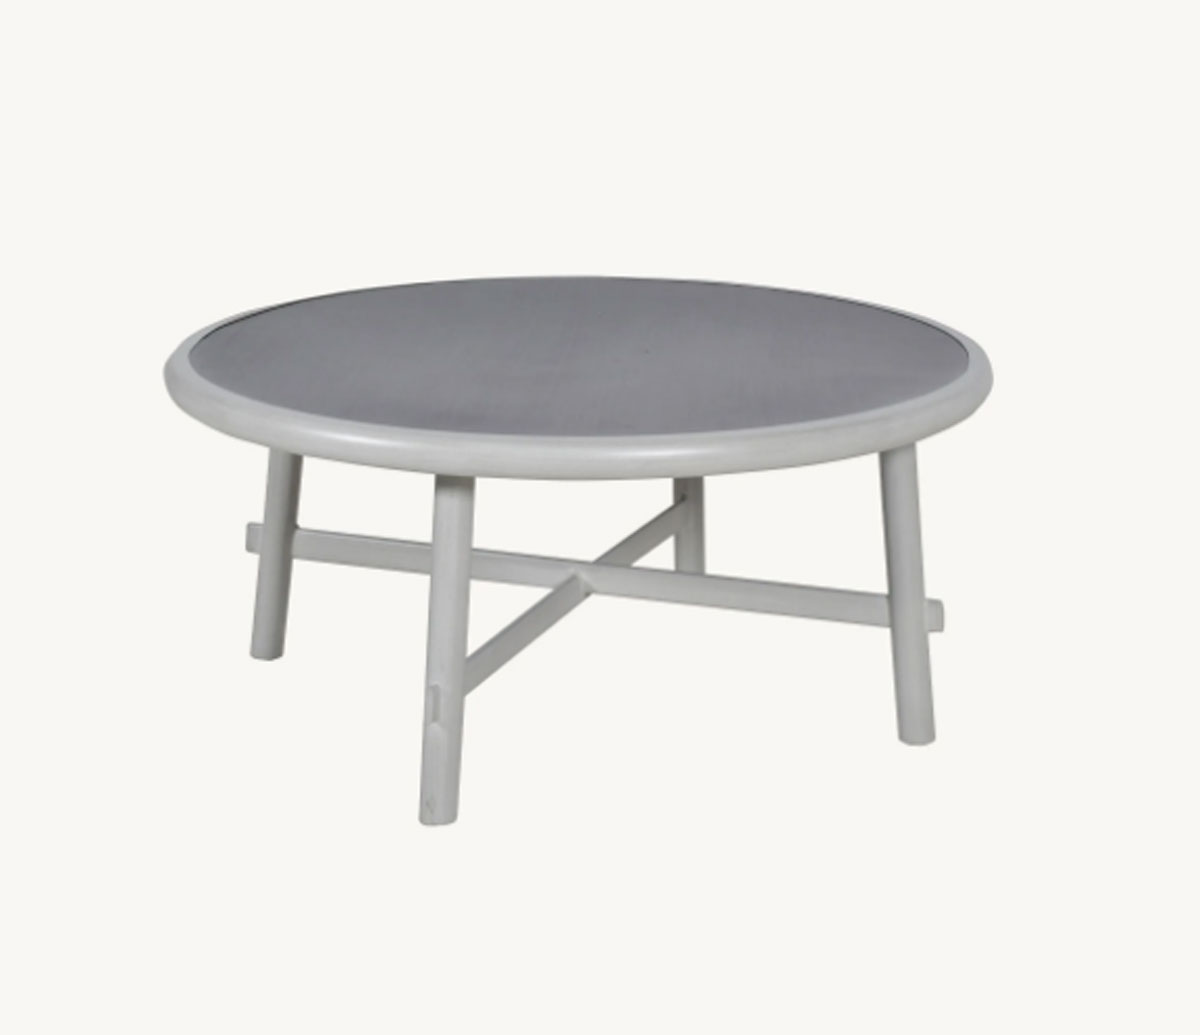 Castelle Barbados 42 inch Round Chat Table